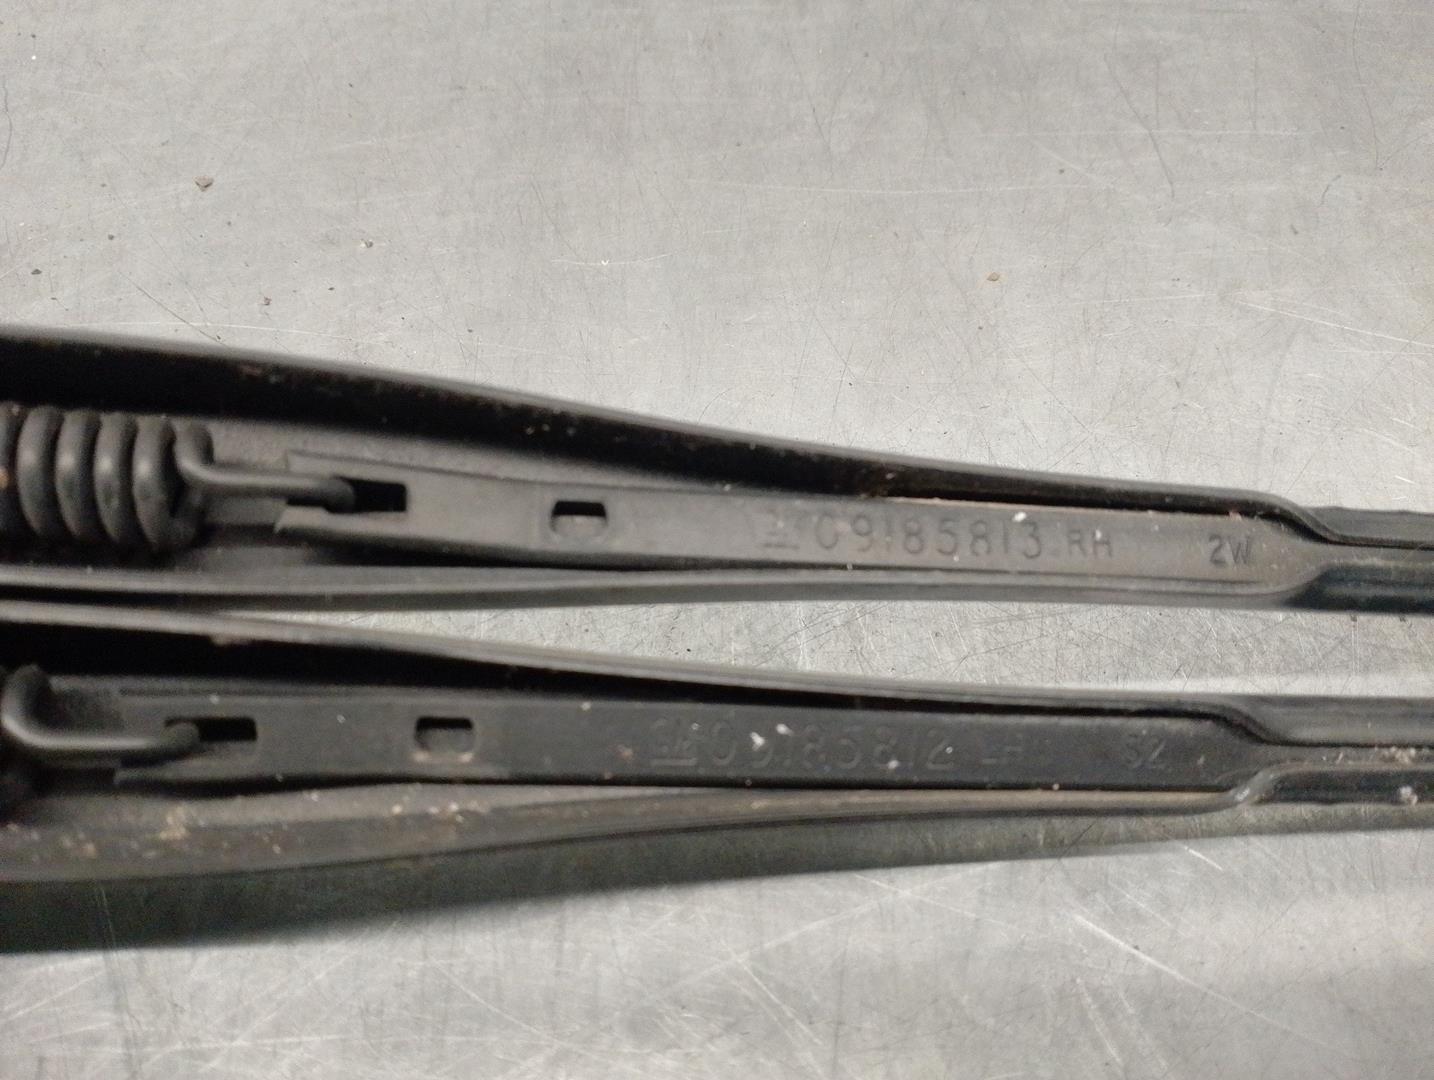 OPEL Vectra C (2003-2008) Front Wiper Arms 09185812, 09185813 24210870